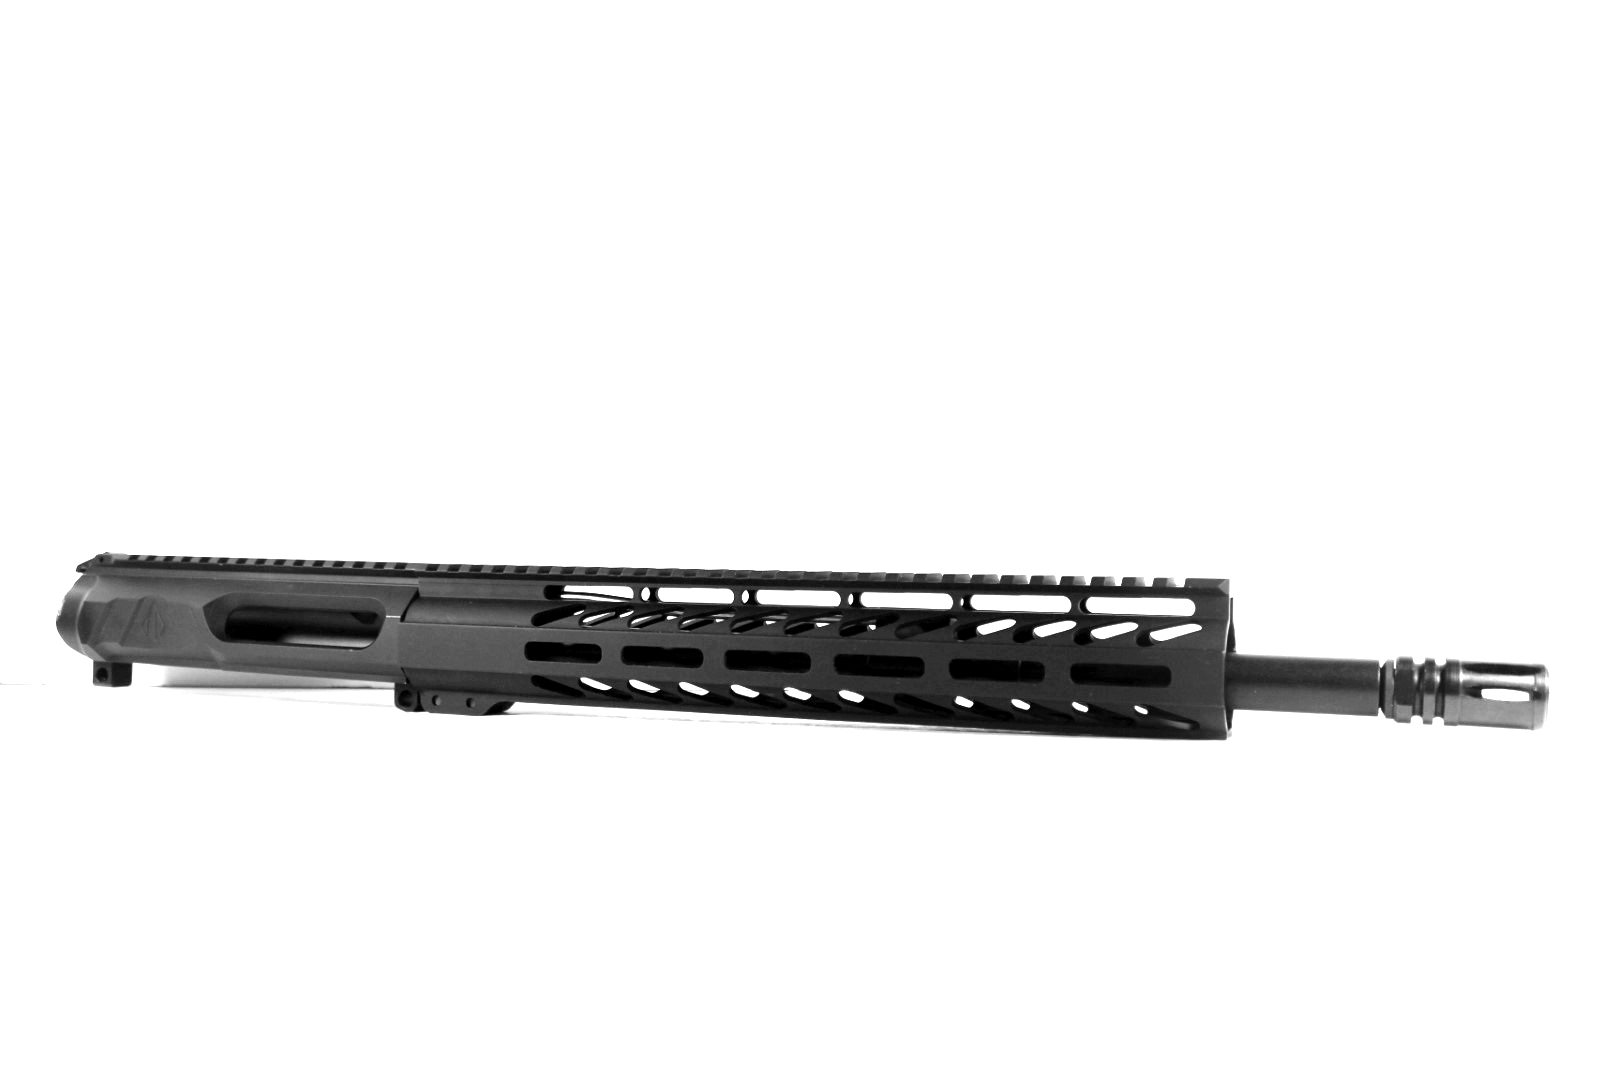 14.5 inch AR-15 Non Reciprocating Side Charging 5.56 NATO (223/5.56) Carbine Length Melonite Upper